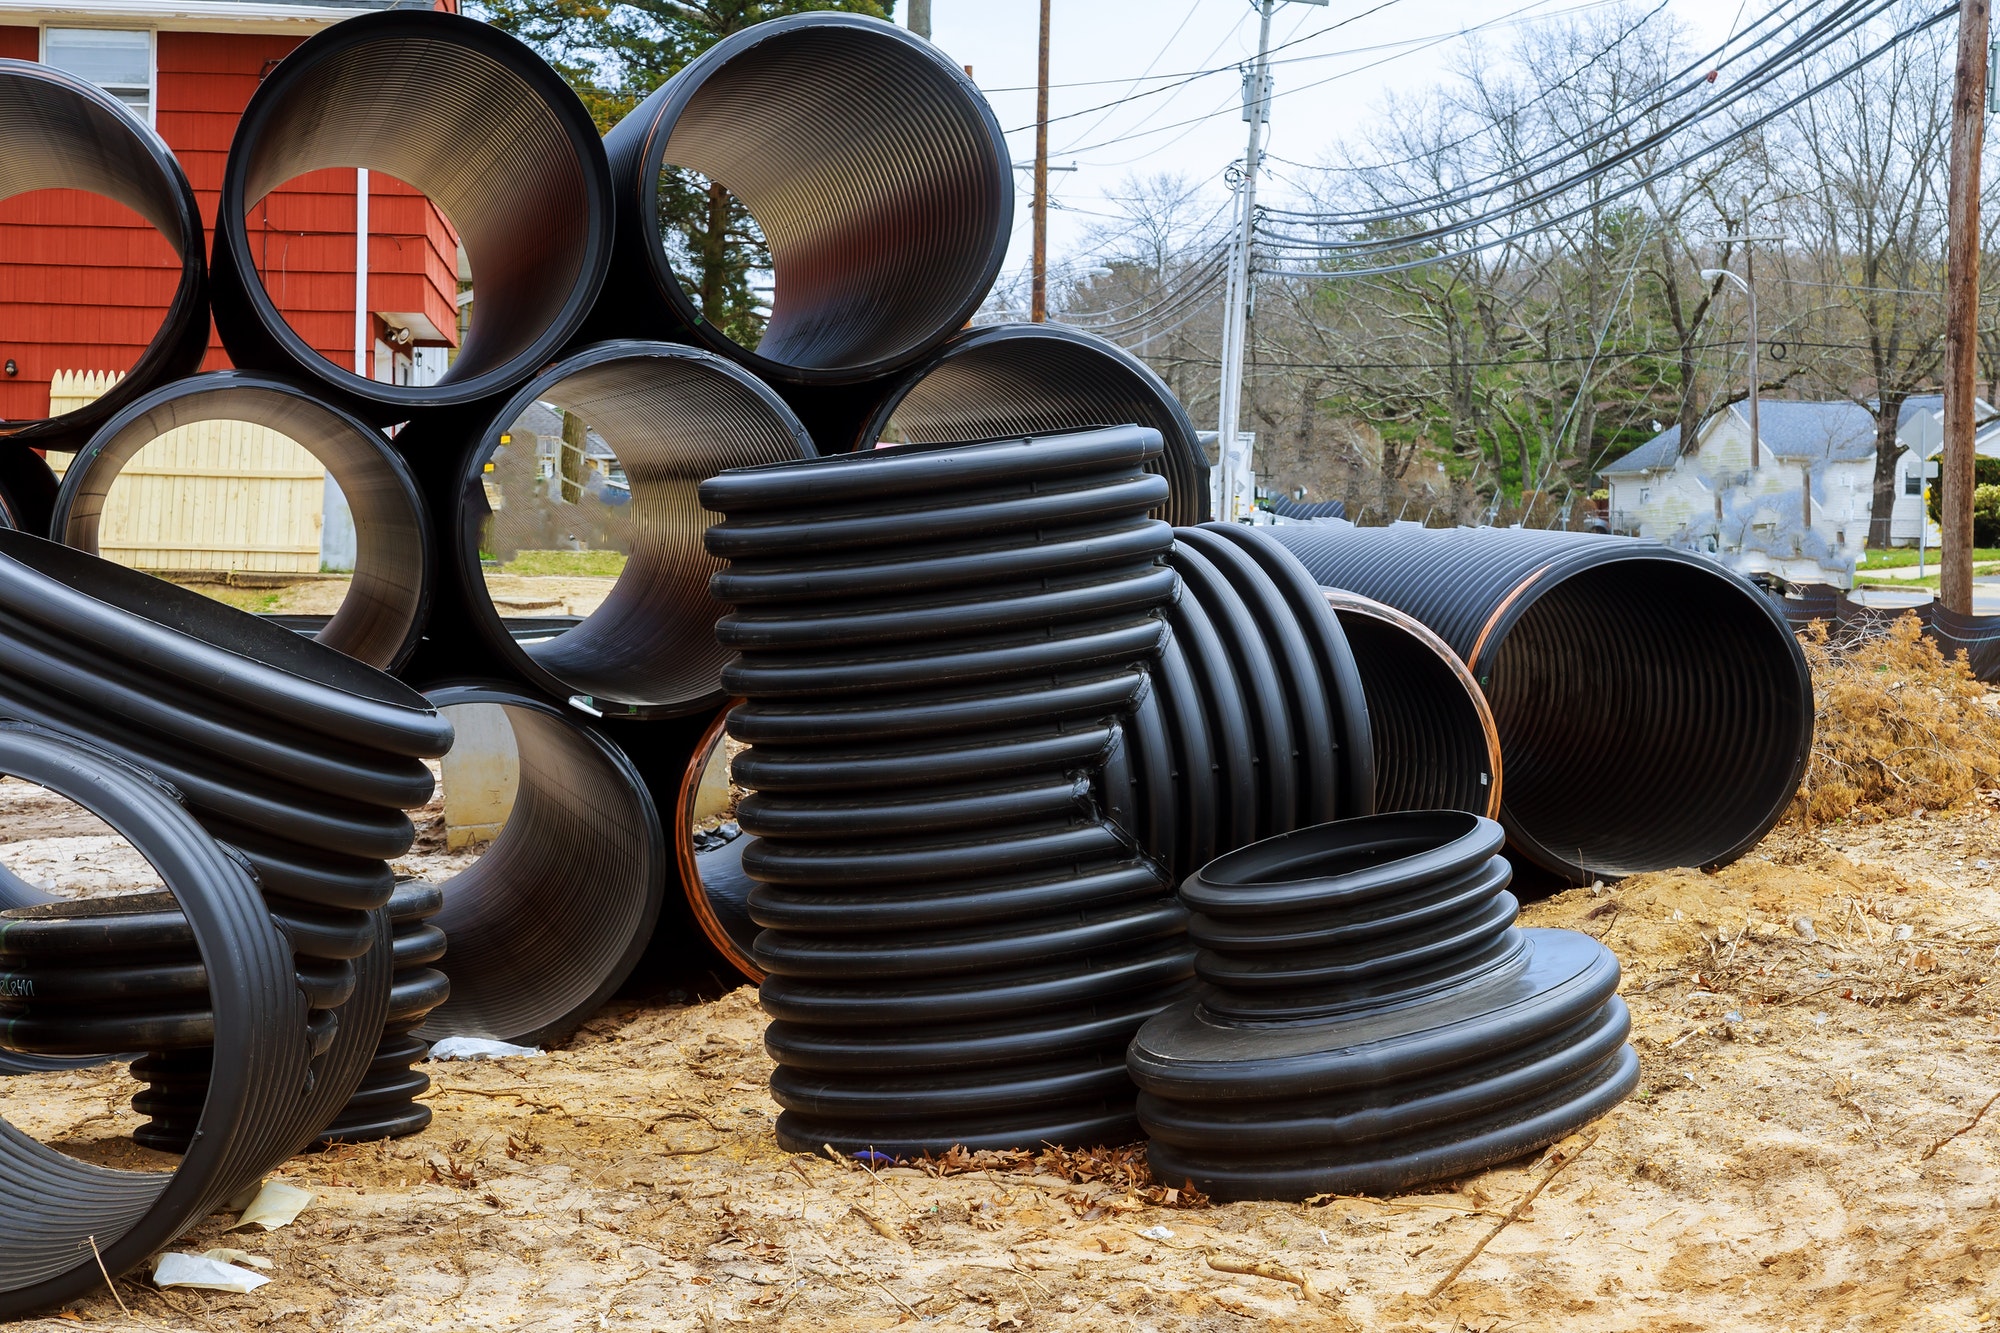 New gray plastic pipes for the sewage system preparation for installation pipes outdoors